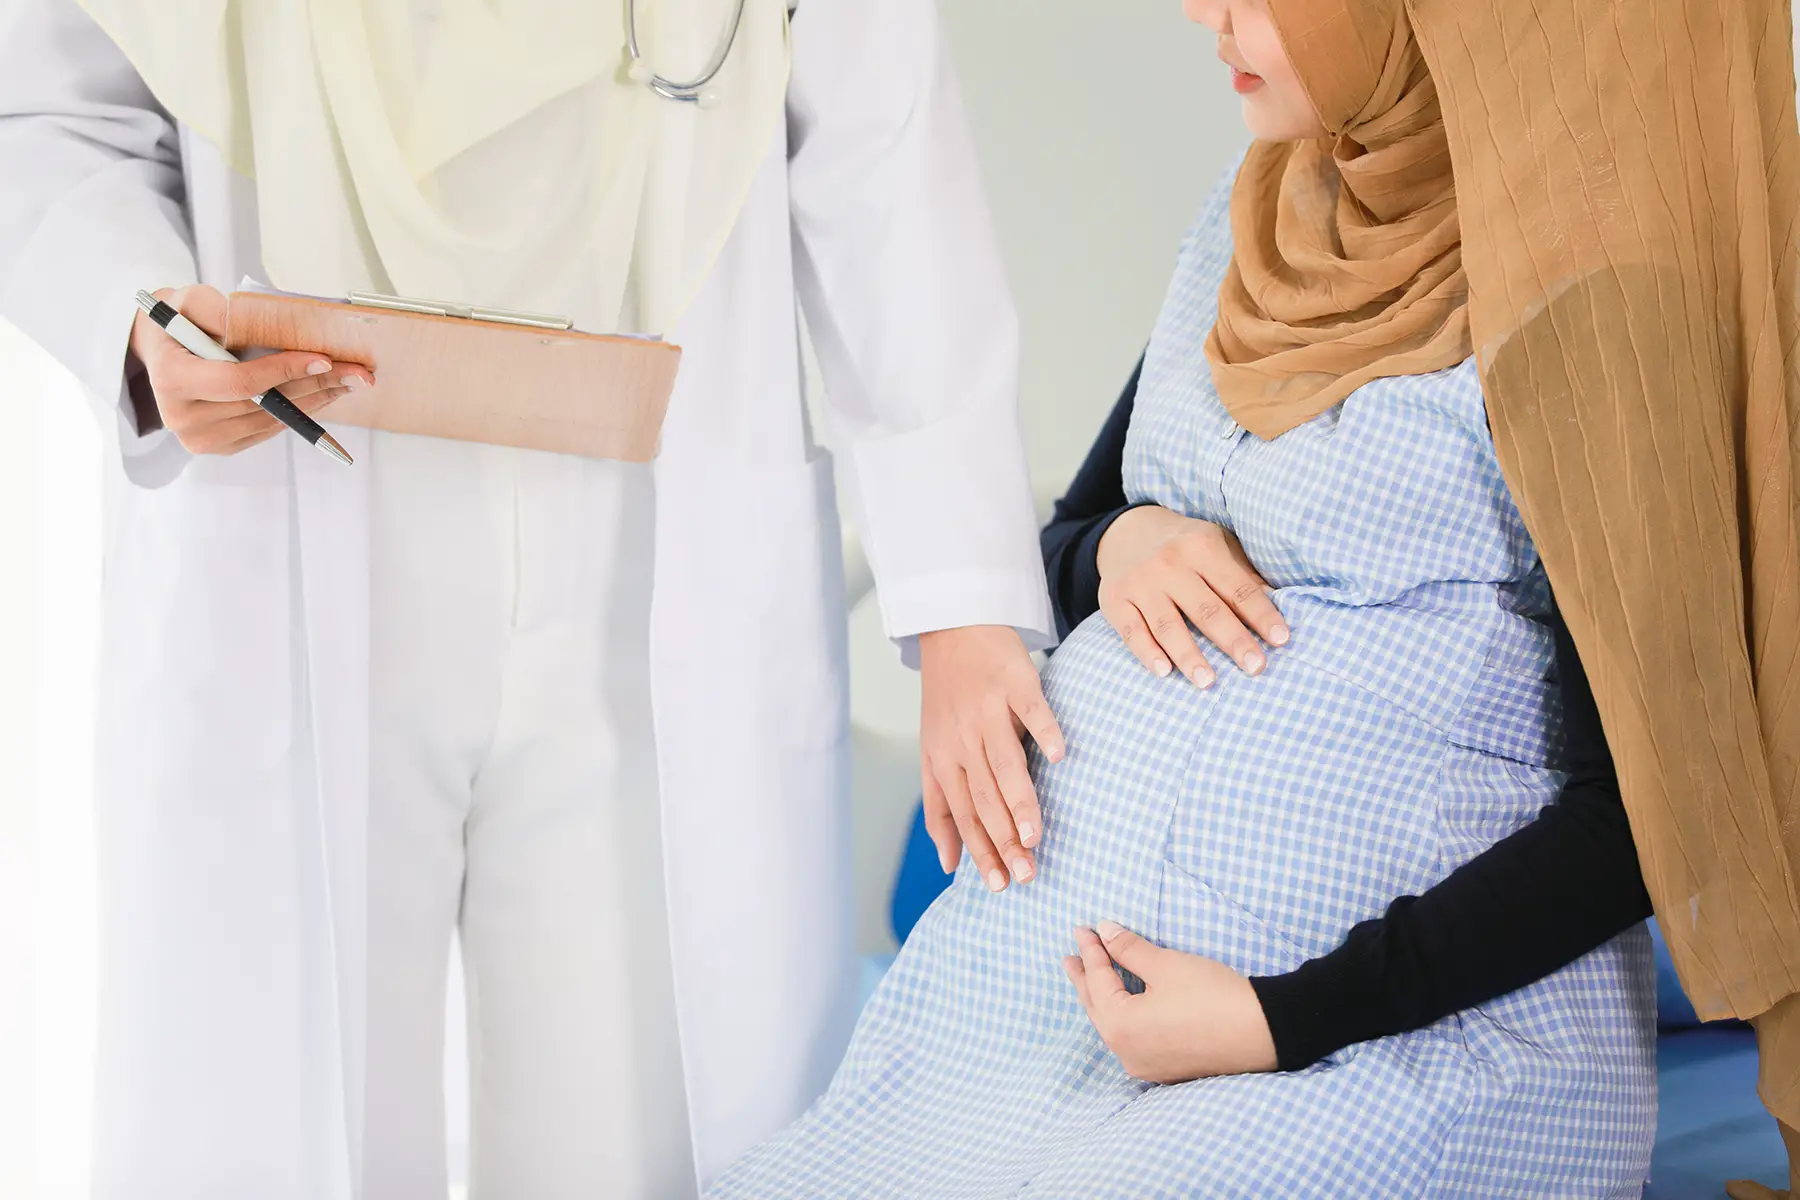 Pregnant Muslim woman at the doctor